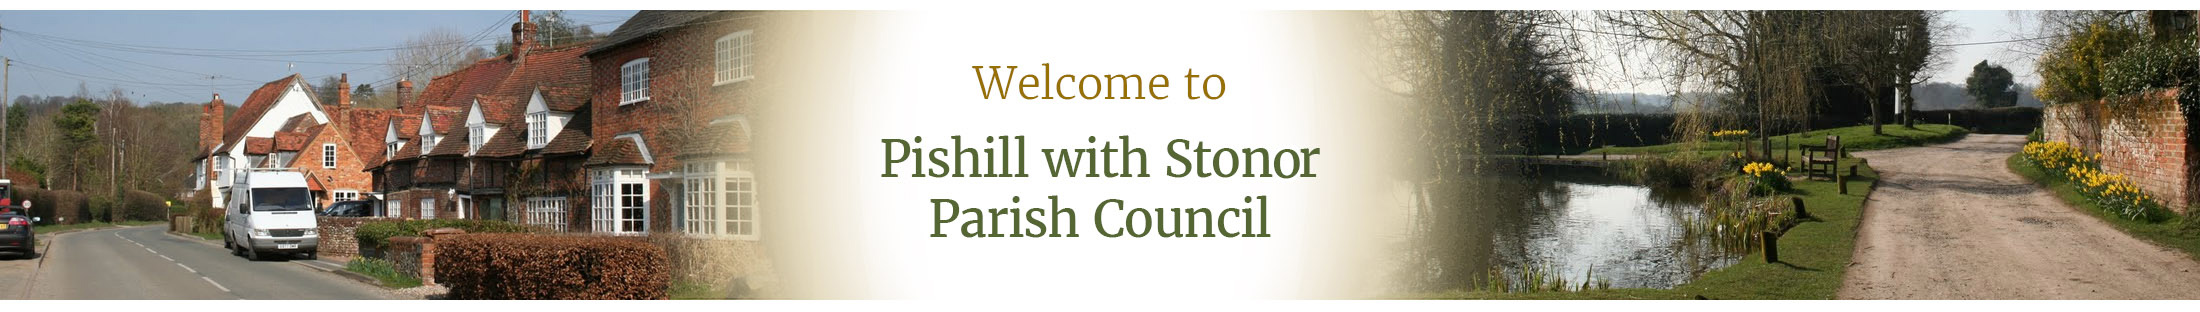 Header Image for Pishill with Stonor Parish Council